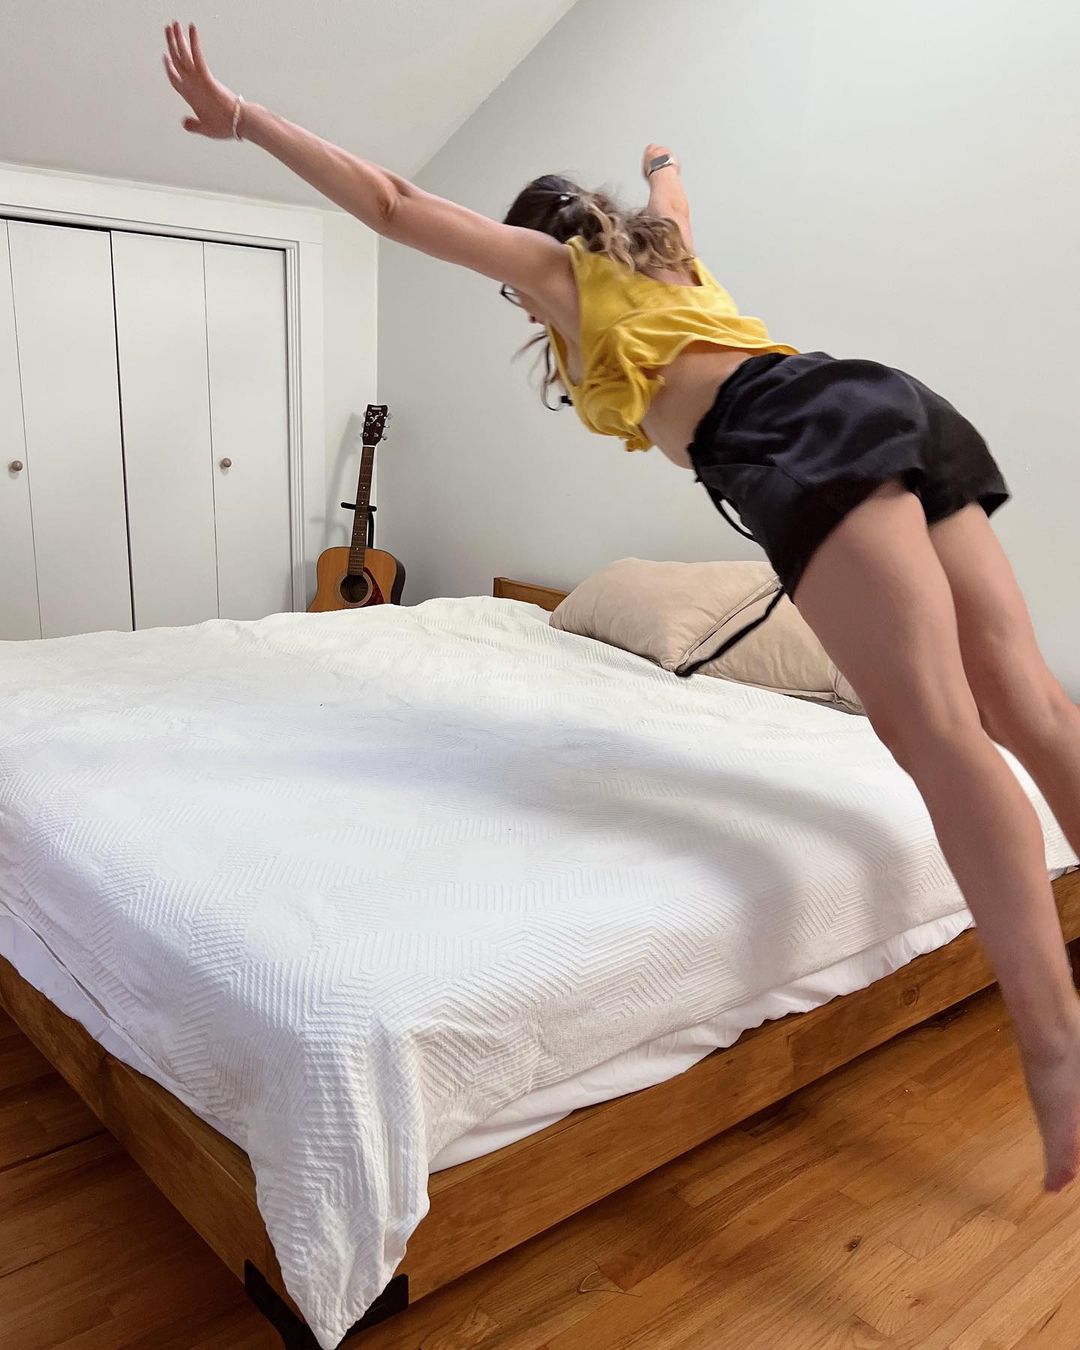 Joana Bianchi jumping on the bed